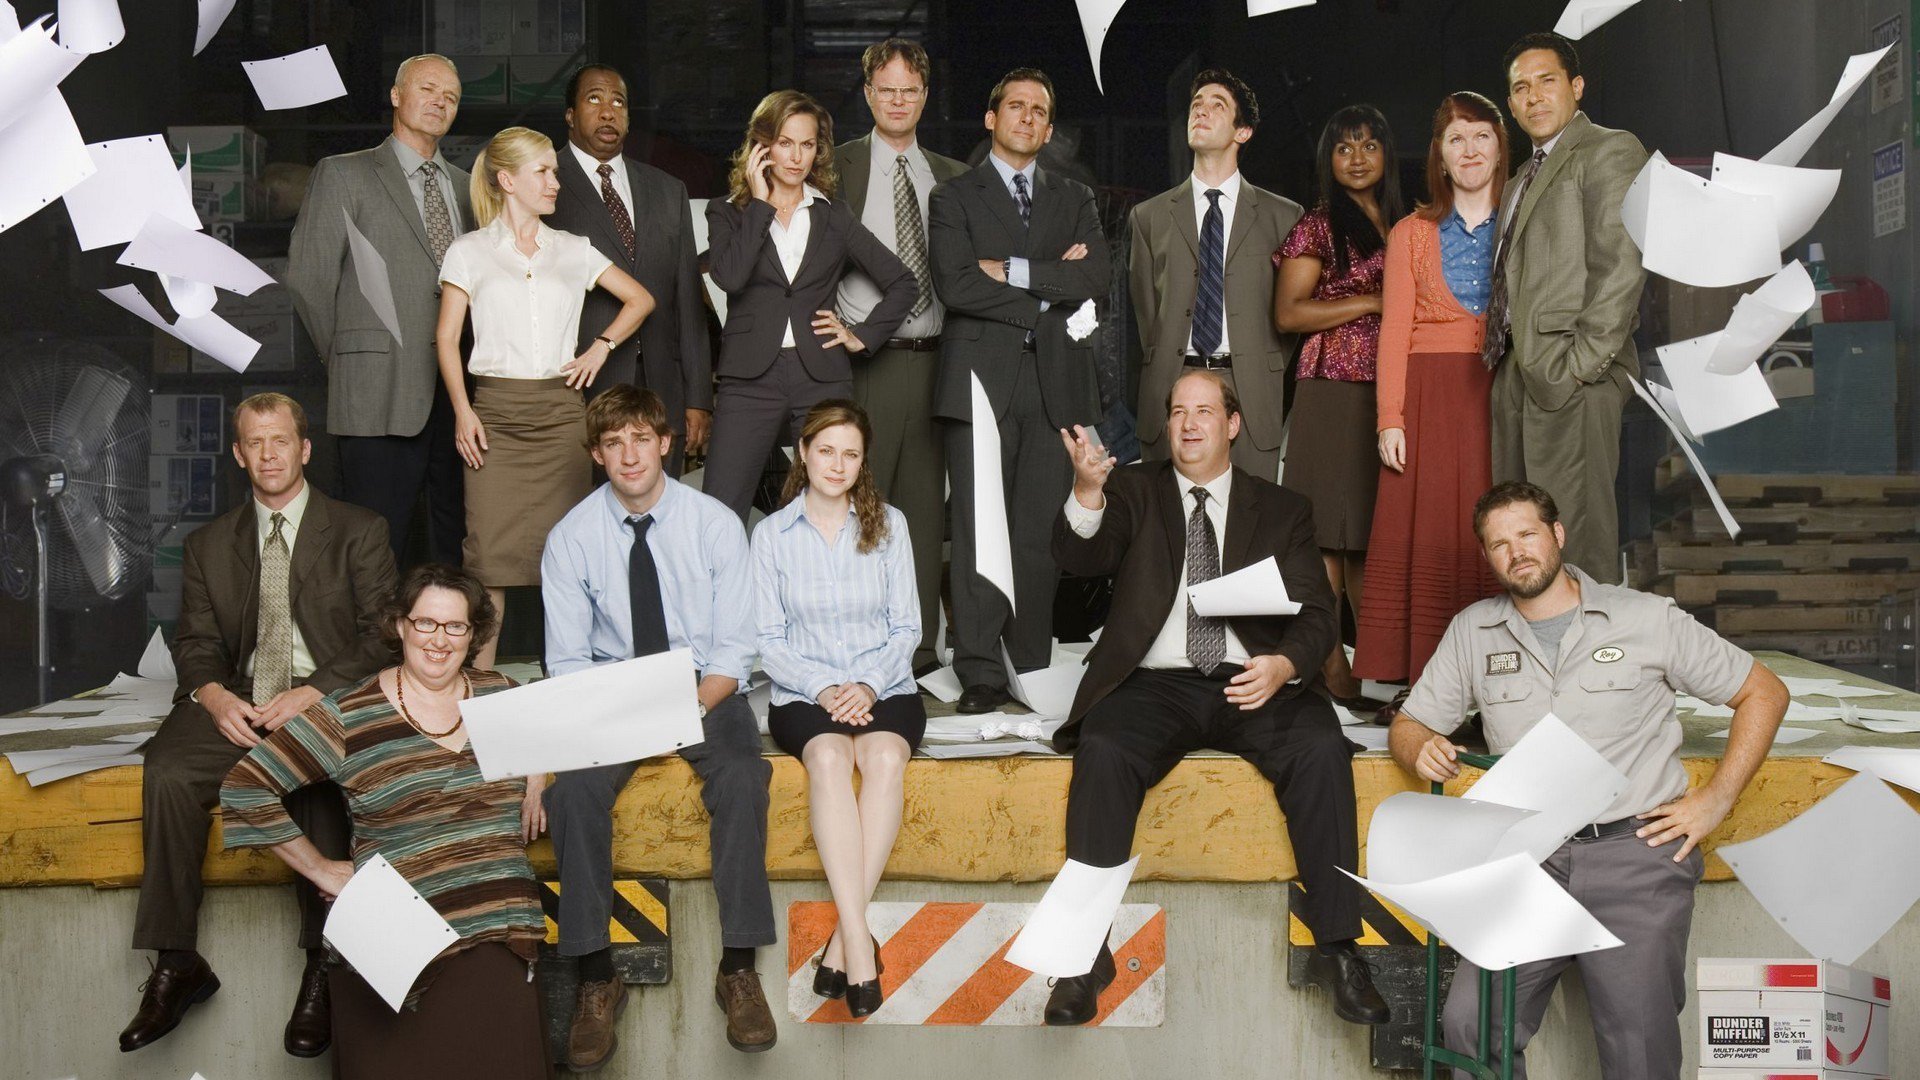 200+] The Office Wallpapers